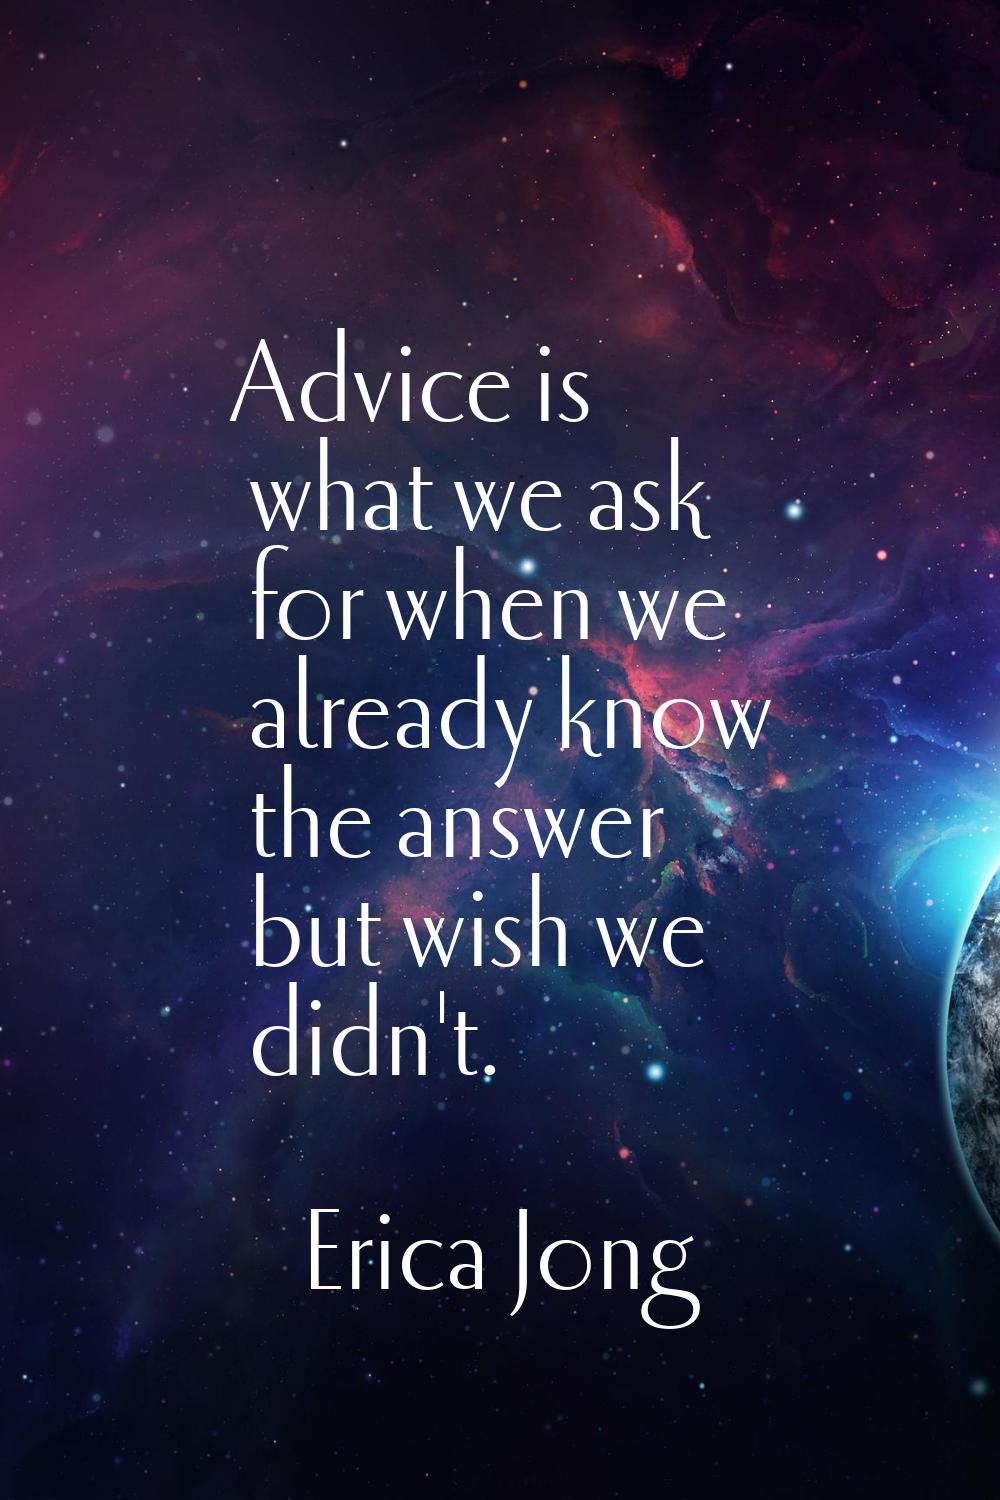 Advice is what we ask for when we already know the answer but wish we didn't.